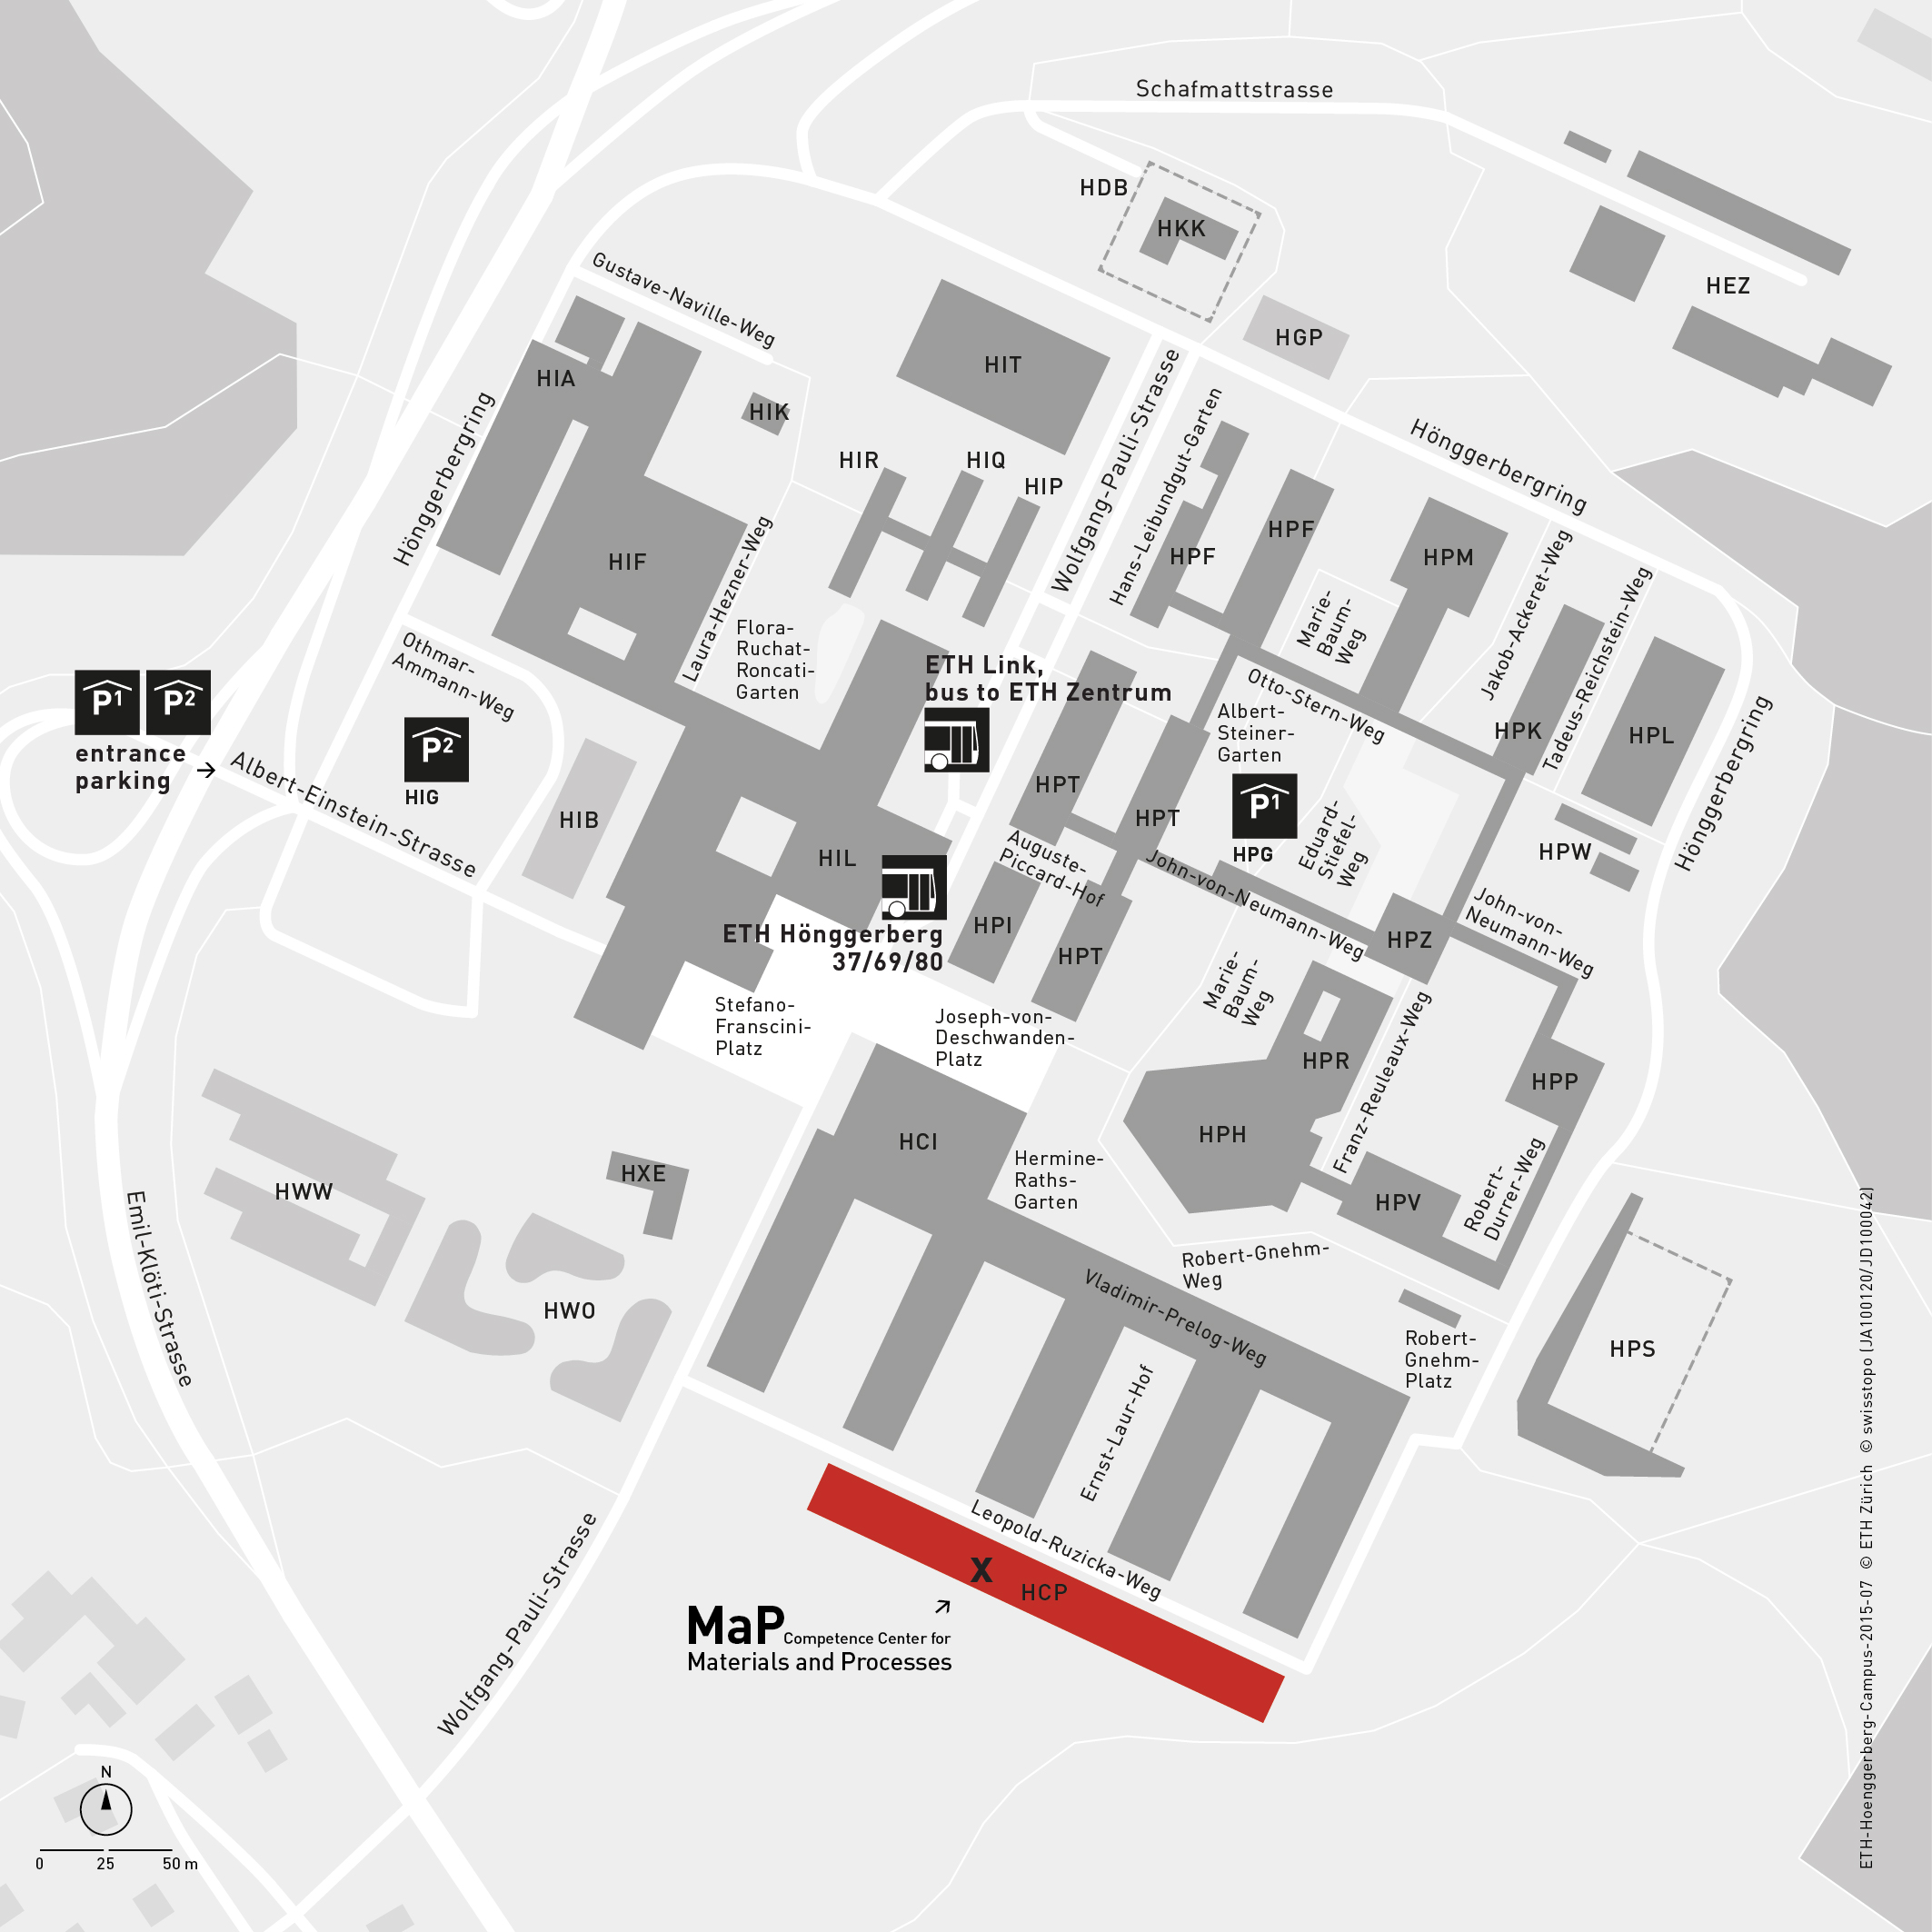 Enlarged view: How to Find the Competence Center for Materials and Processes (MaP)